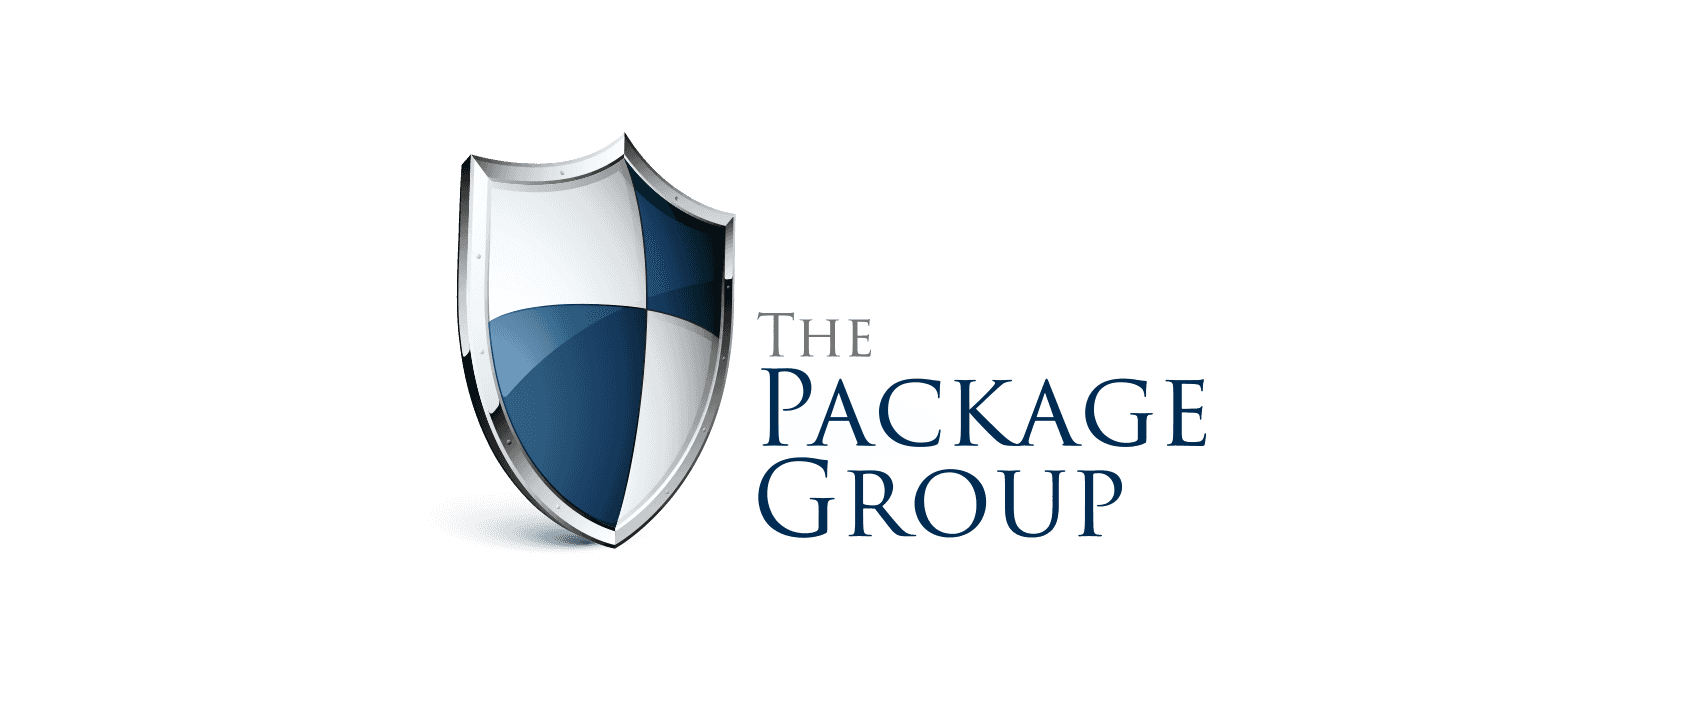 blue and white shield logo - The Package Group